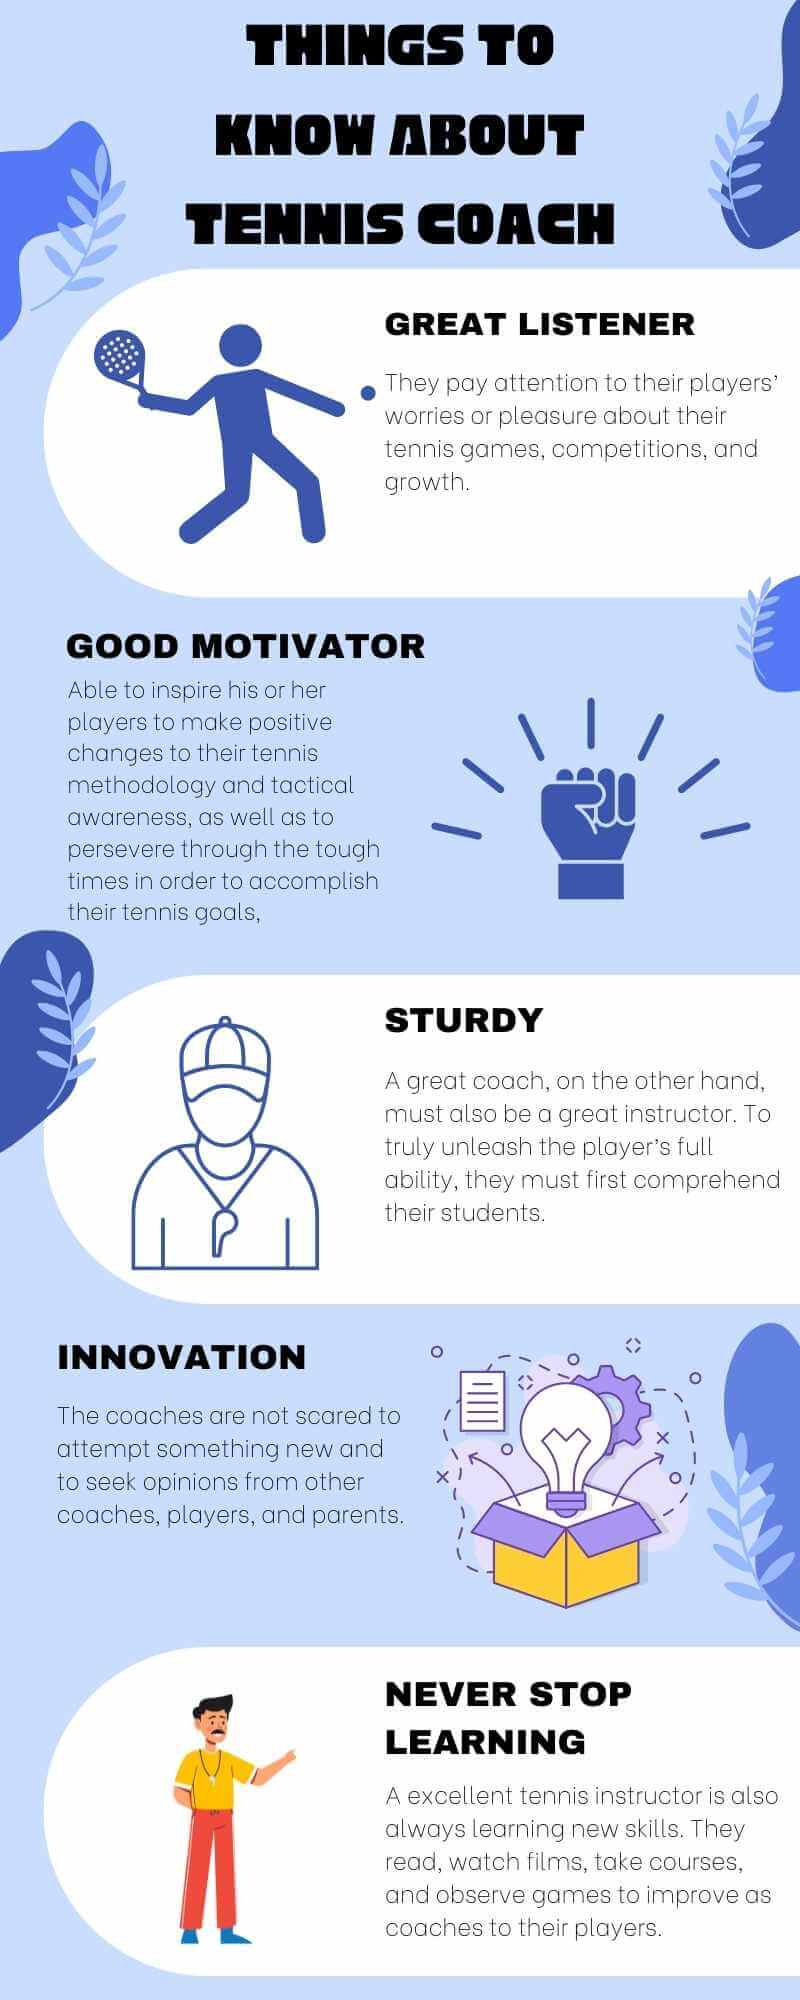 Things to Know About Tennis Coach